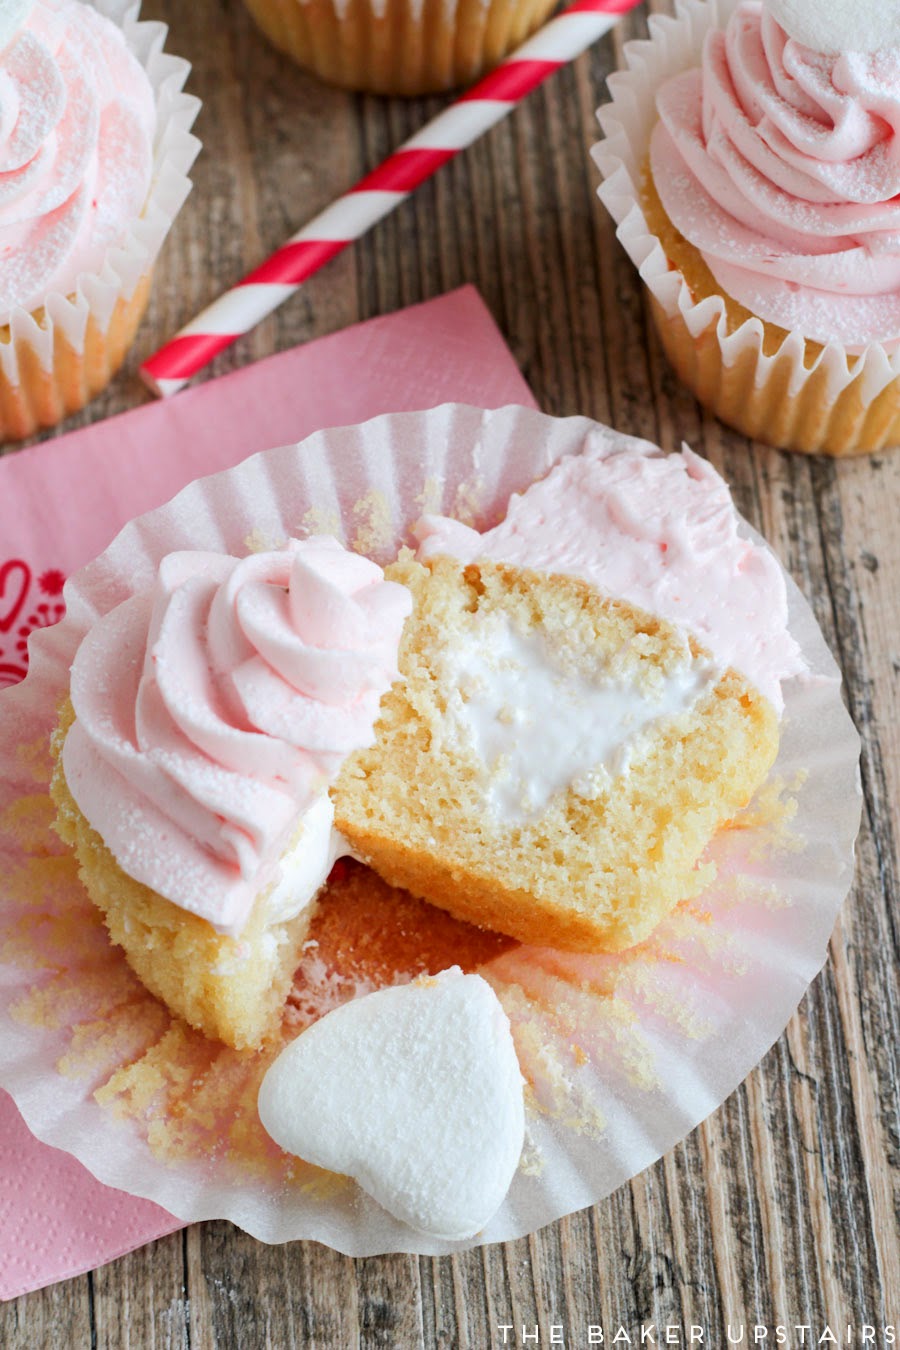 Strawberry marshmallow cupcakes - vanilla cupcakes filled with marshmallow cream and topped with a sweet strawberry marshmallow buttercream. Yum!